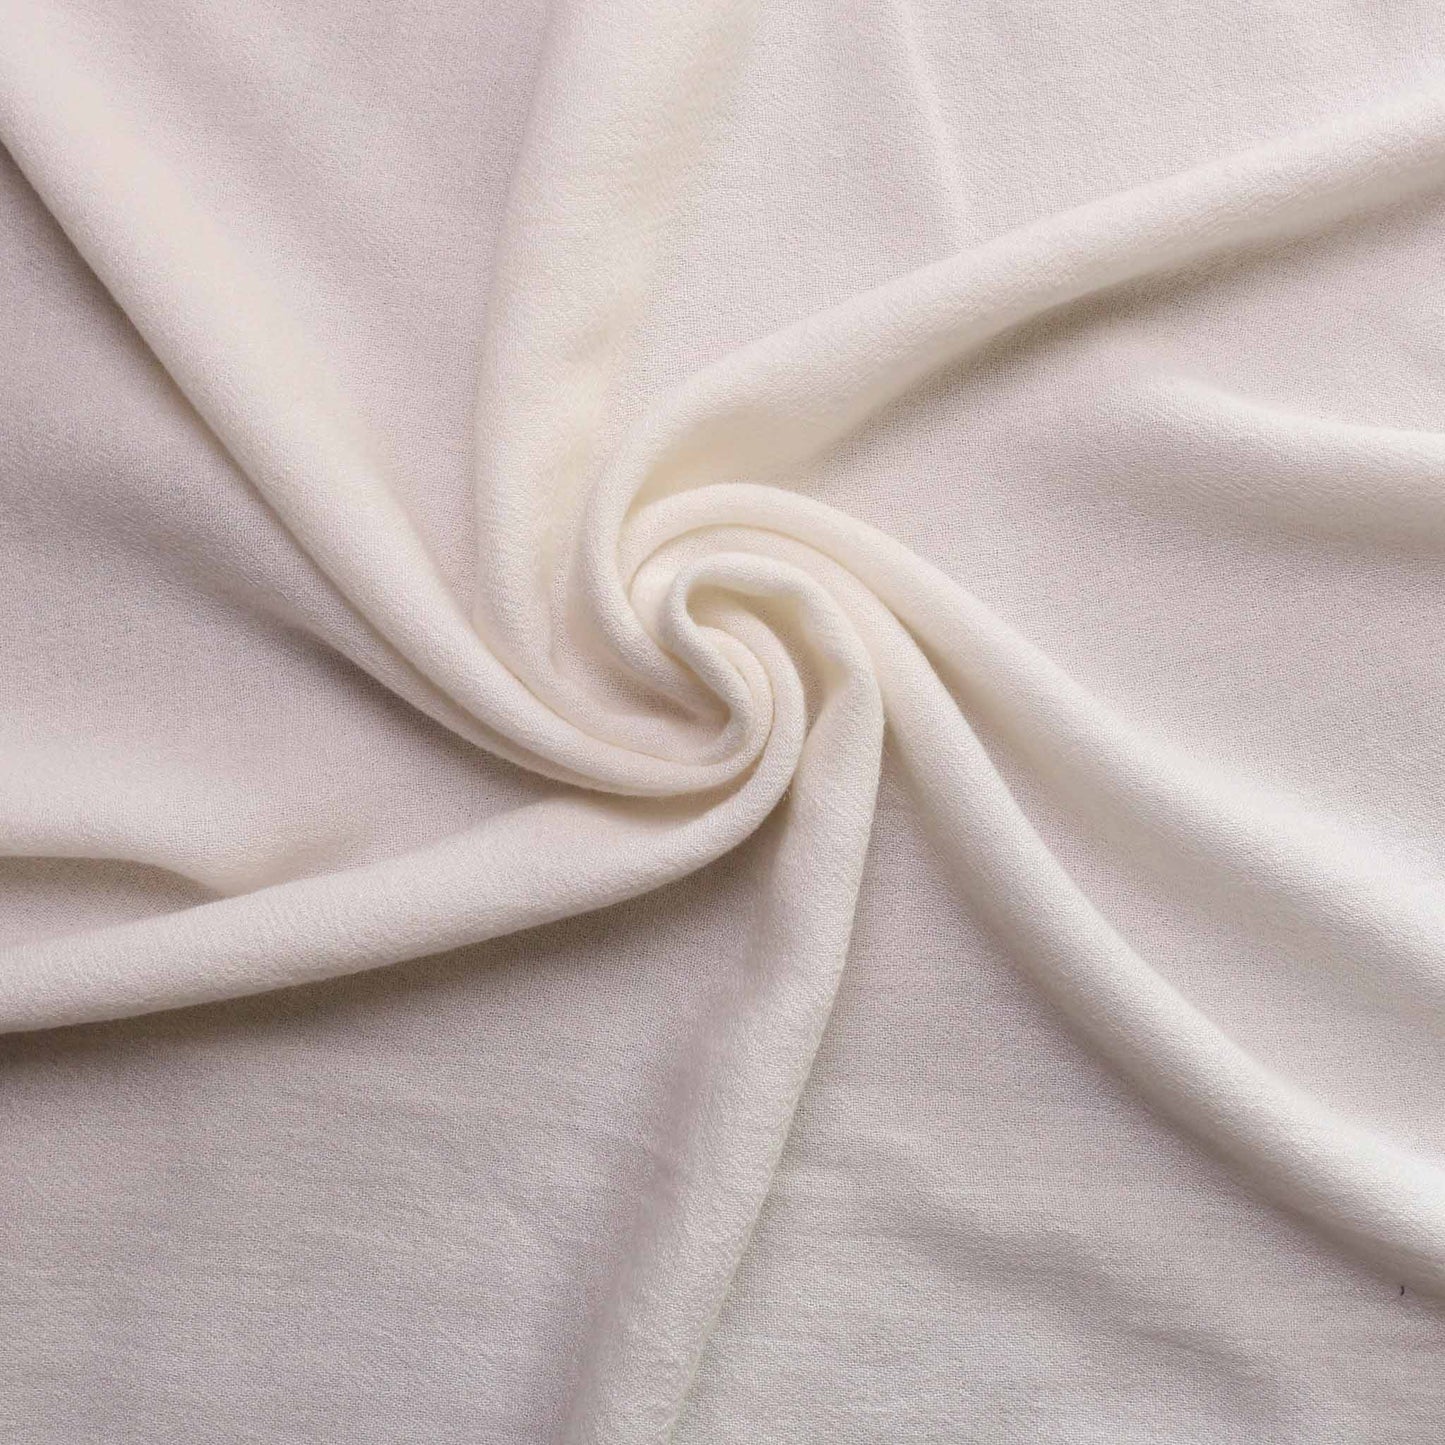 wool viscose cheesecloth fabric for dressmaking in plain off white colour